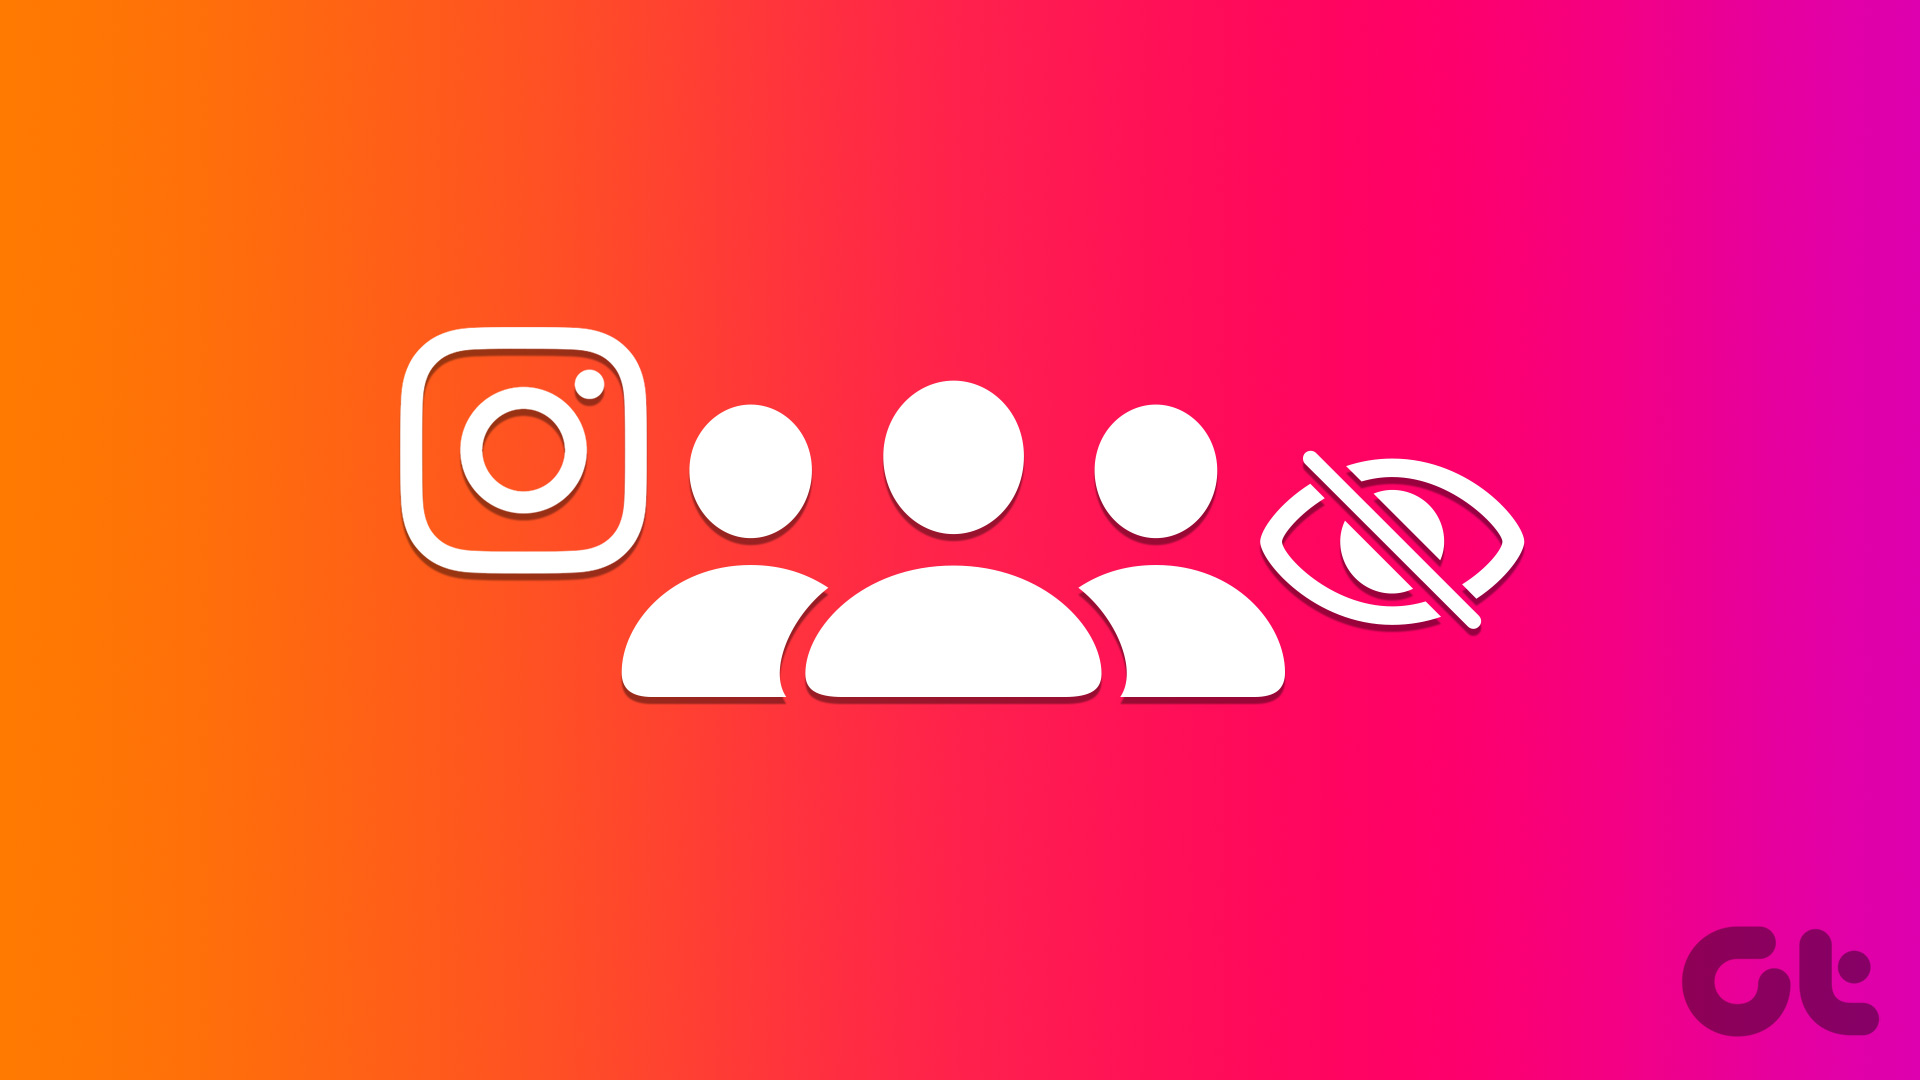 How to Hide Who You Follow on Instagram